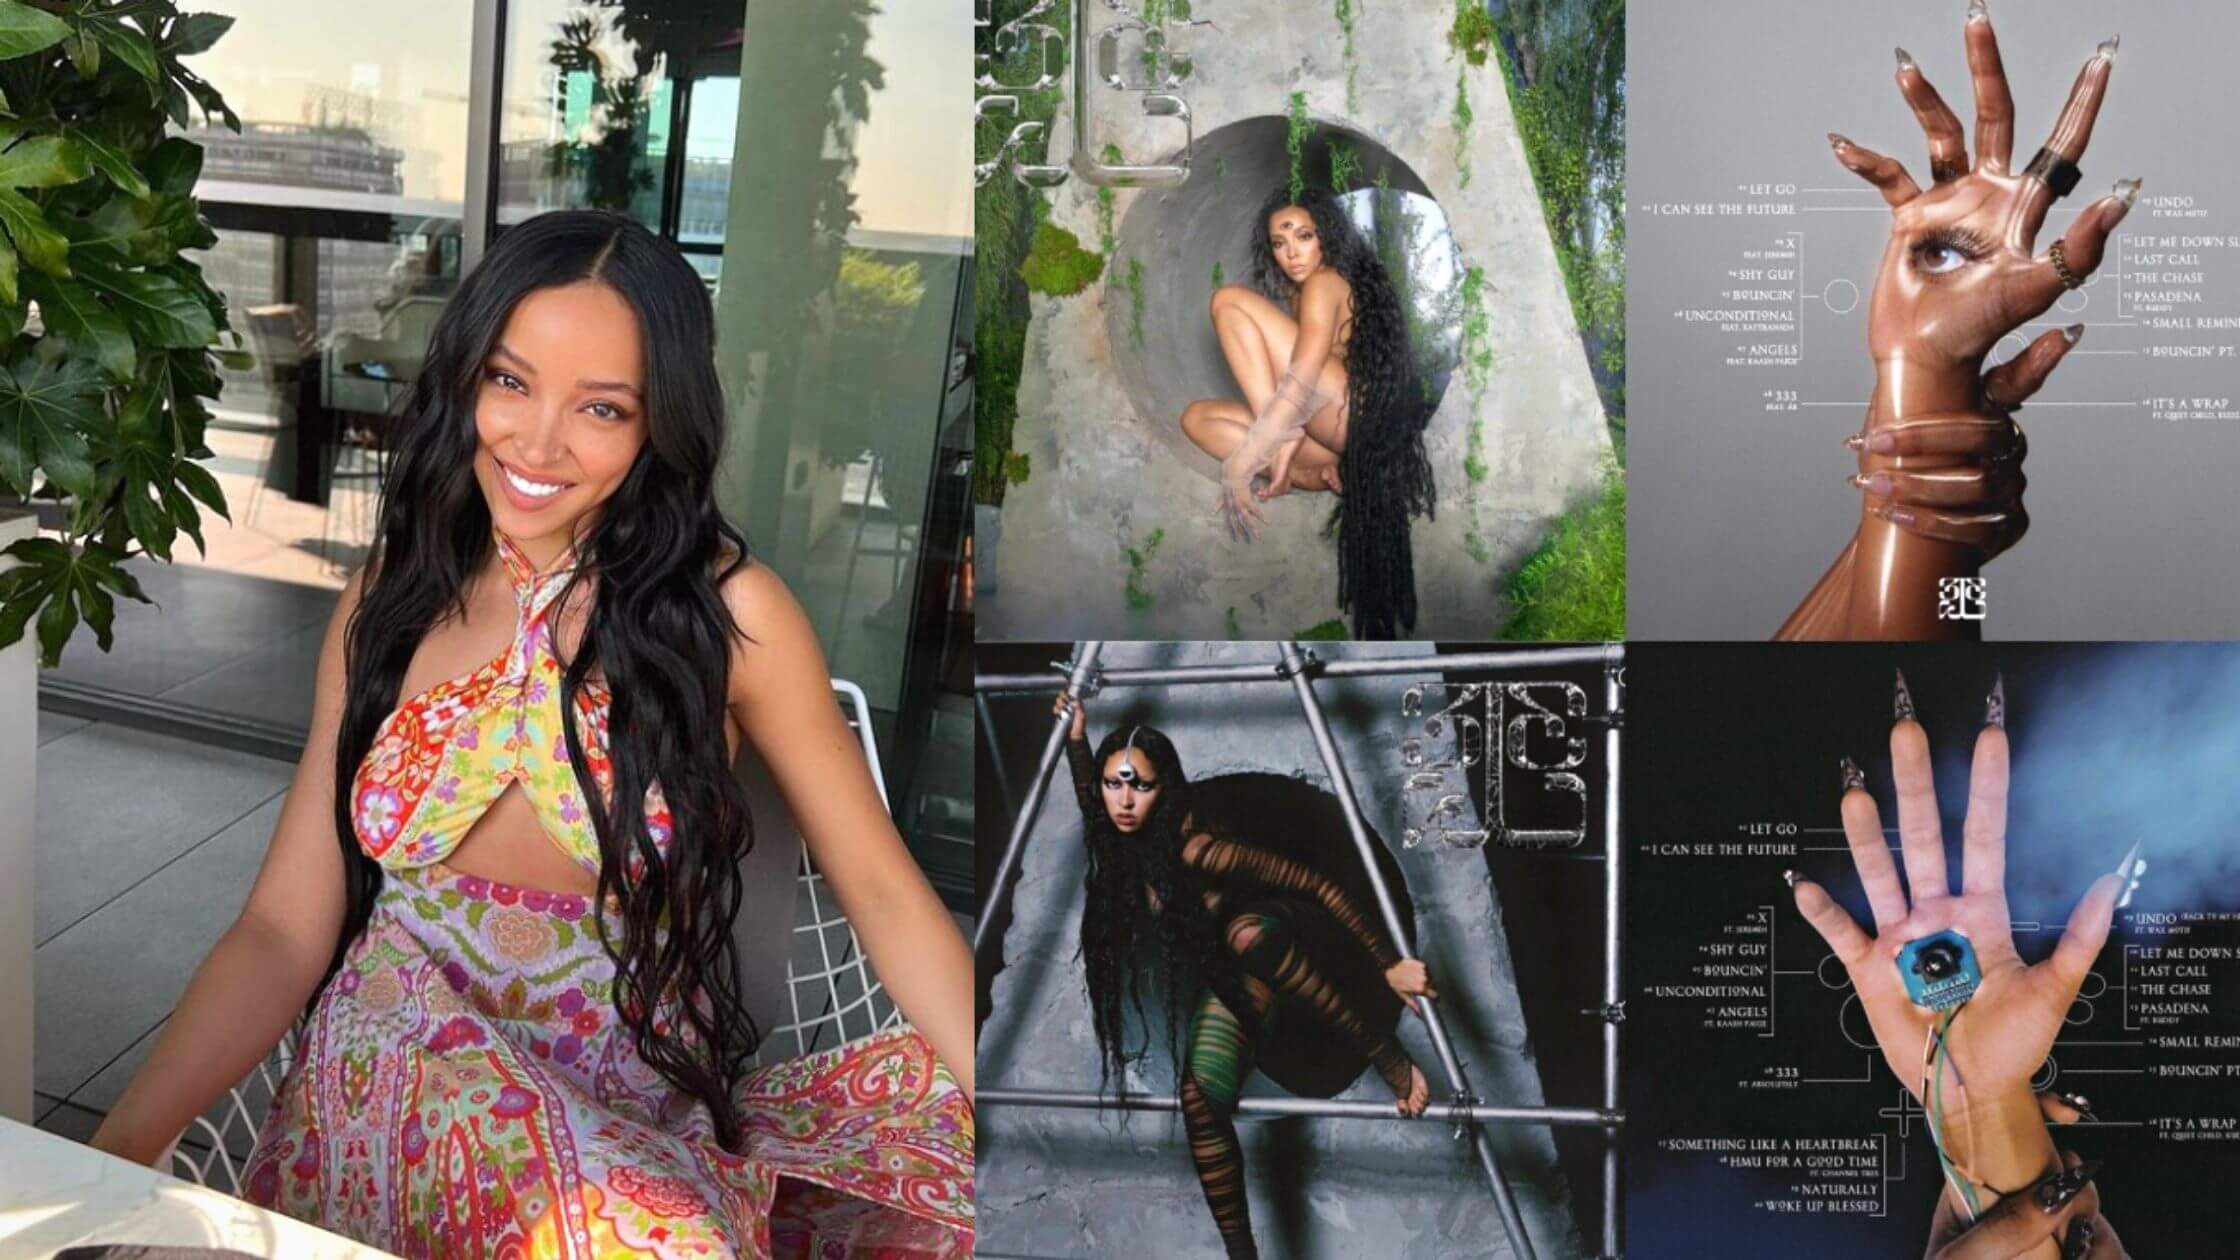 333-DELUXE-OUT-NOW-Look-How-Tinashe-Proves-Revenge-Is-Sweet-By-The-Deluxe-Version-Of-333-Album-1